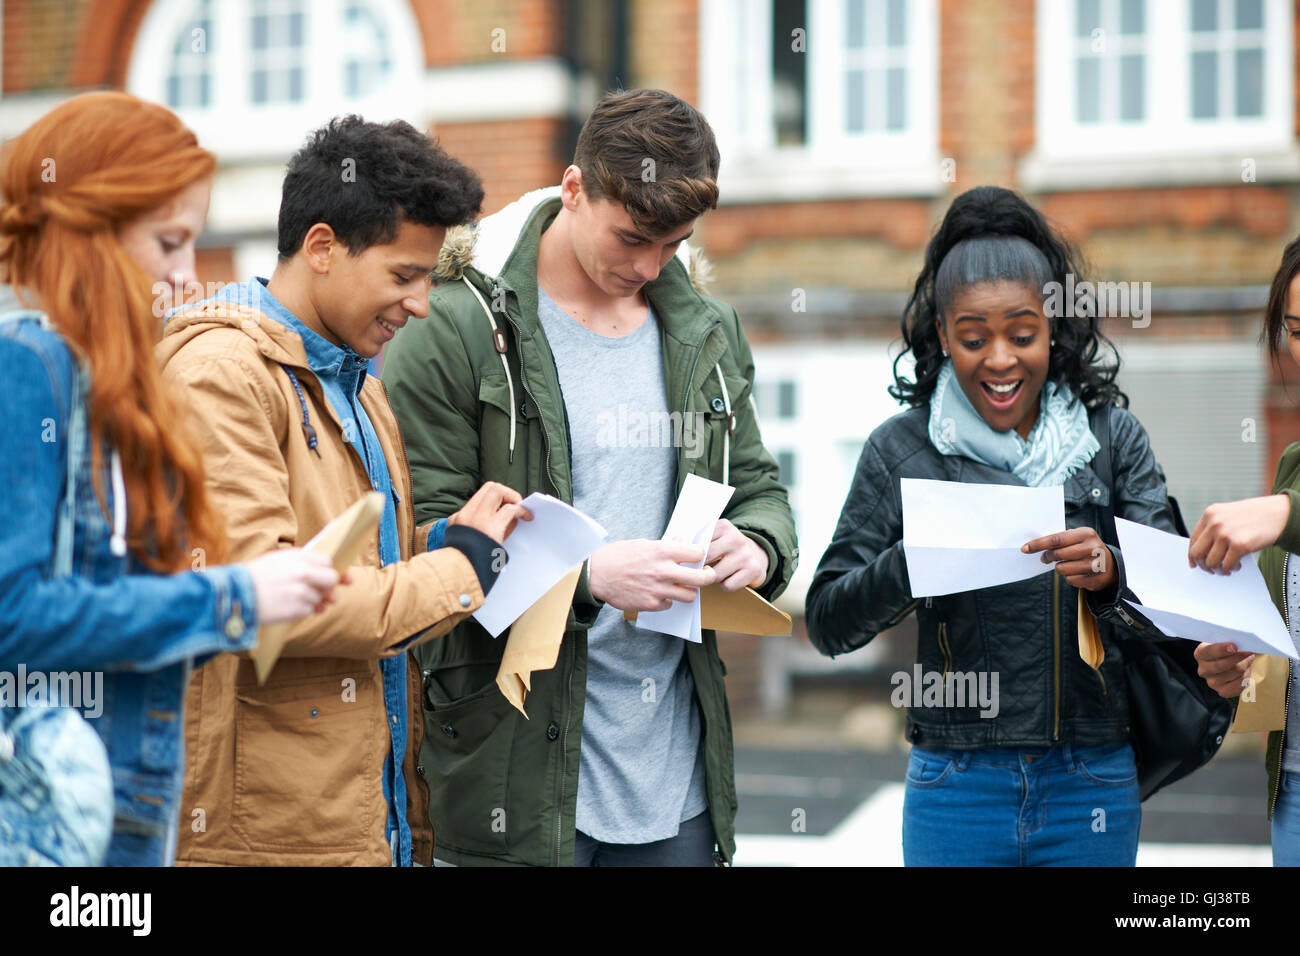 Young adult college students reading exam results on campus Stock Photo